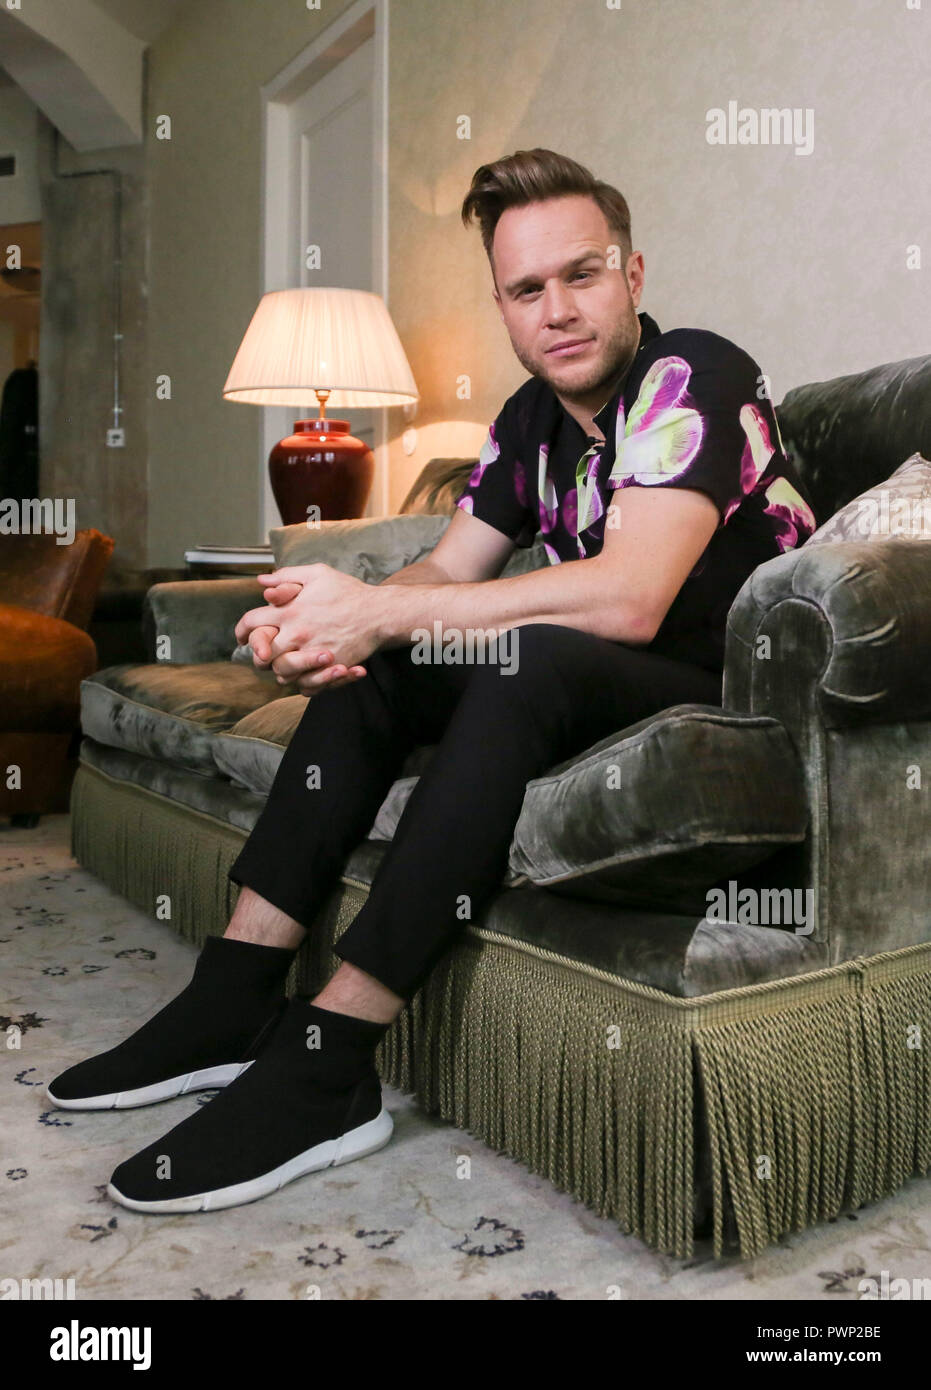 04 October 2018, Berlin: 04 October 2018, Germany, Berlin: Olly Murs looks  sits on a sofa during an interview at Soho House. On 09 November 2018 his  new album "You Know, I